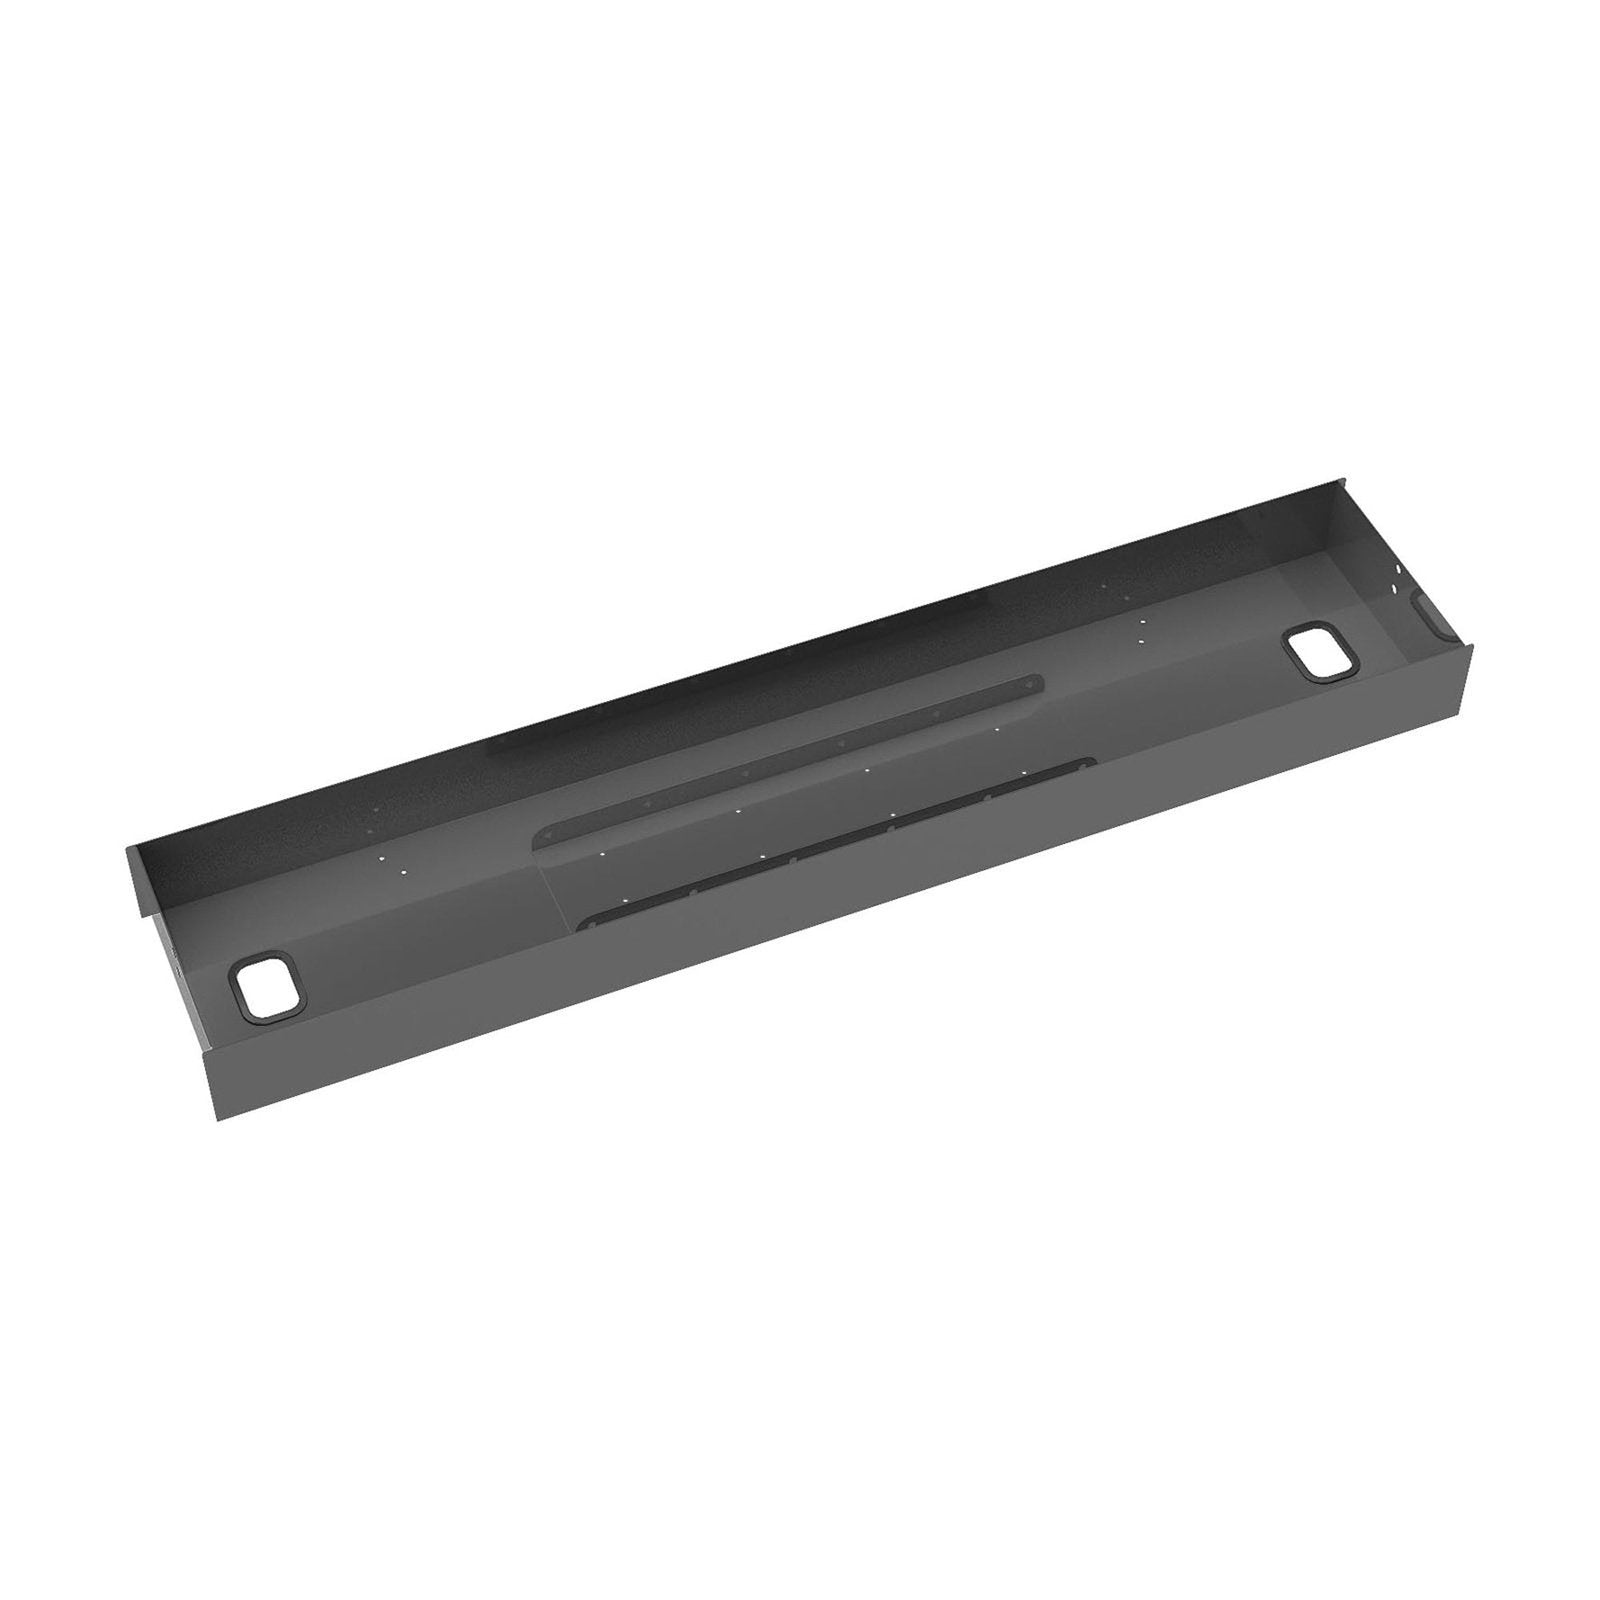 Elev8 lower cable channel with cover for back-to-back desks - Office Products Online